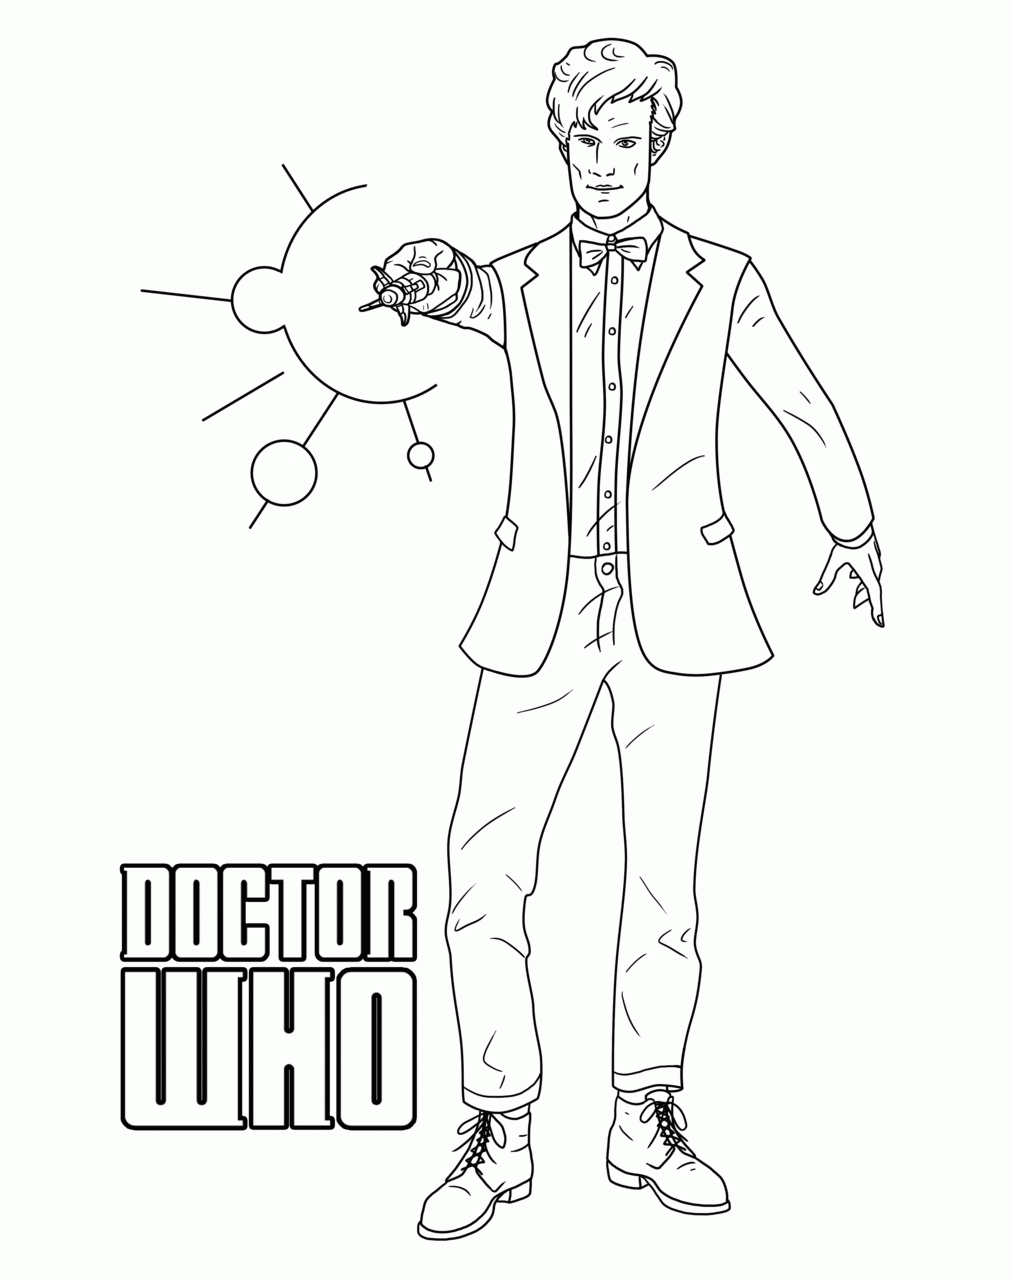 Fresh Doctor Who Coloring Pages Free Coloring Pages - Widetheme